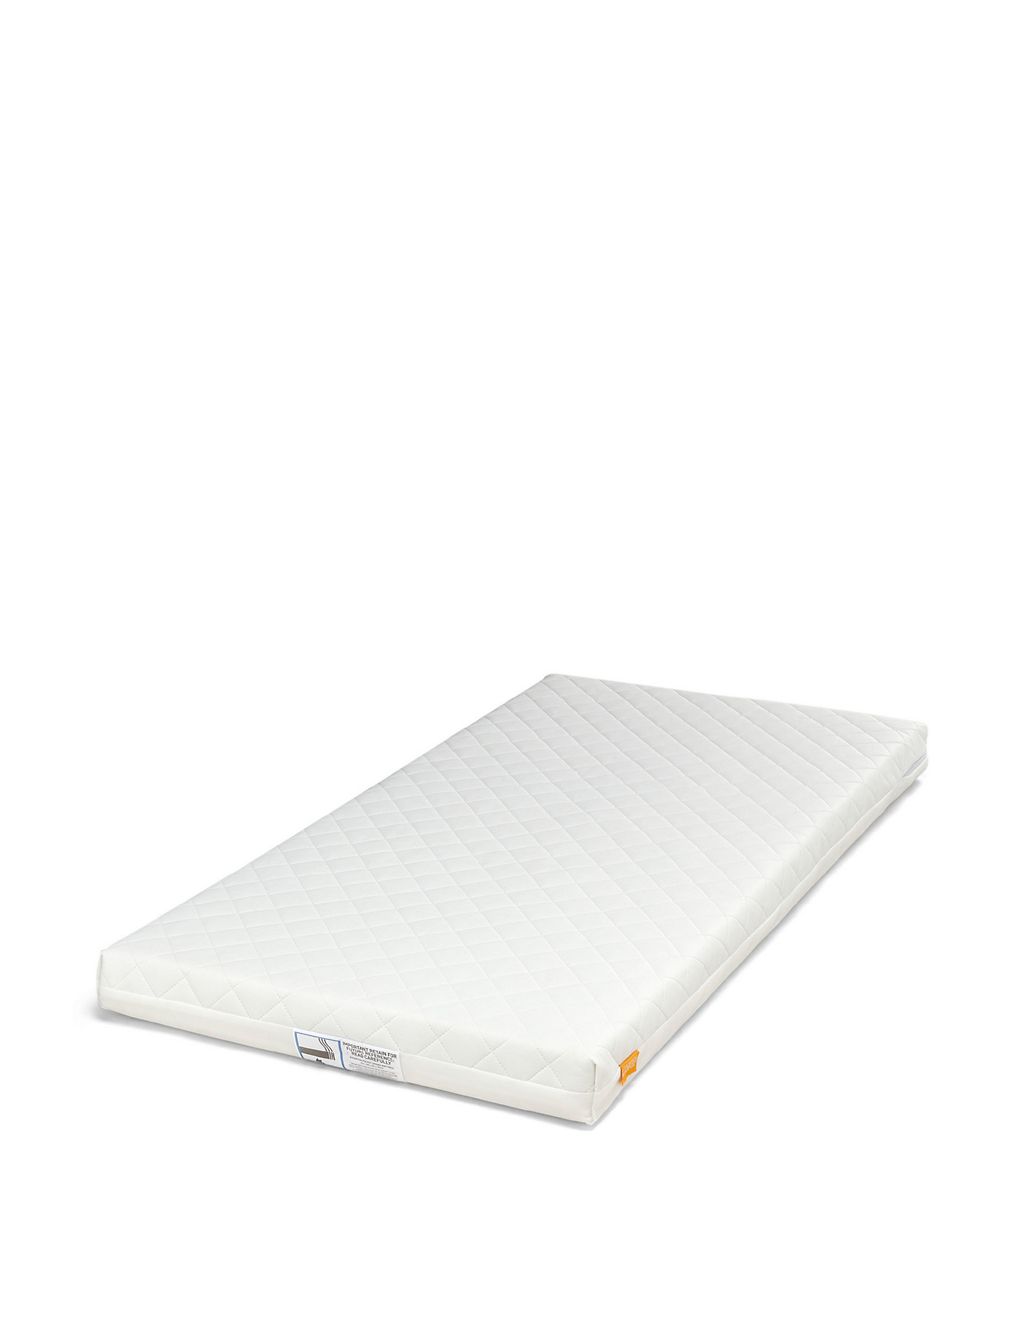 Essential Pocket Spring Cotbed Mattress 3 of 4